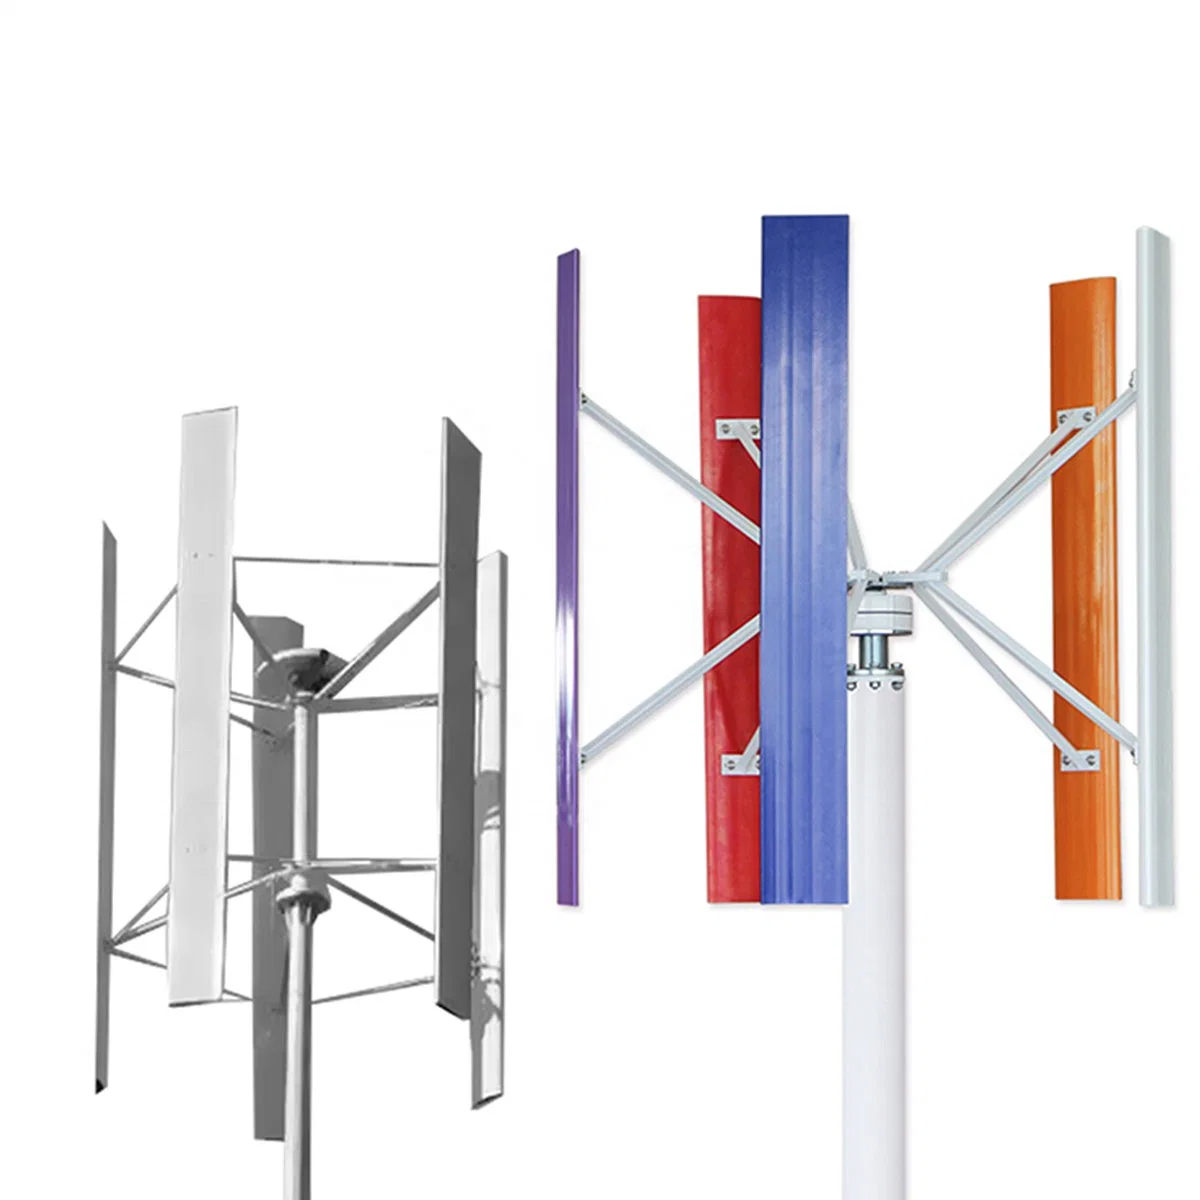 220V 10kw Vertical Wind Turbine Portable Wind Generator for Home Wind Power